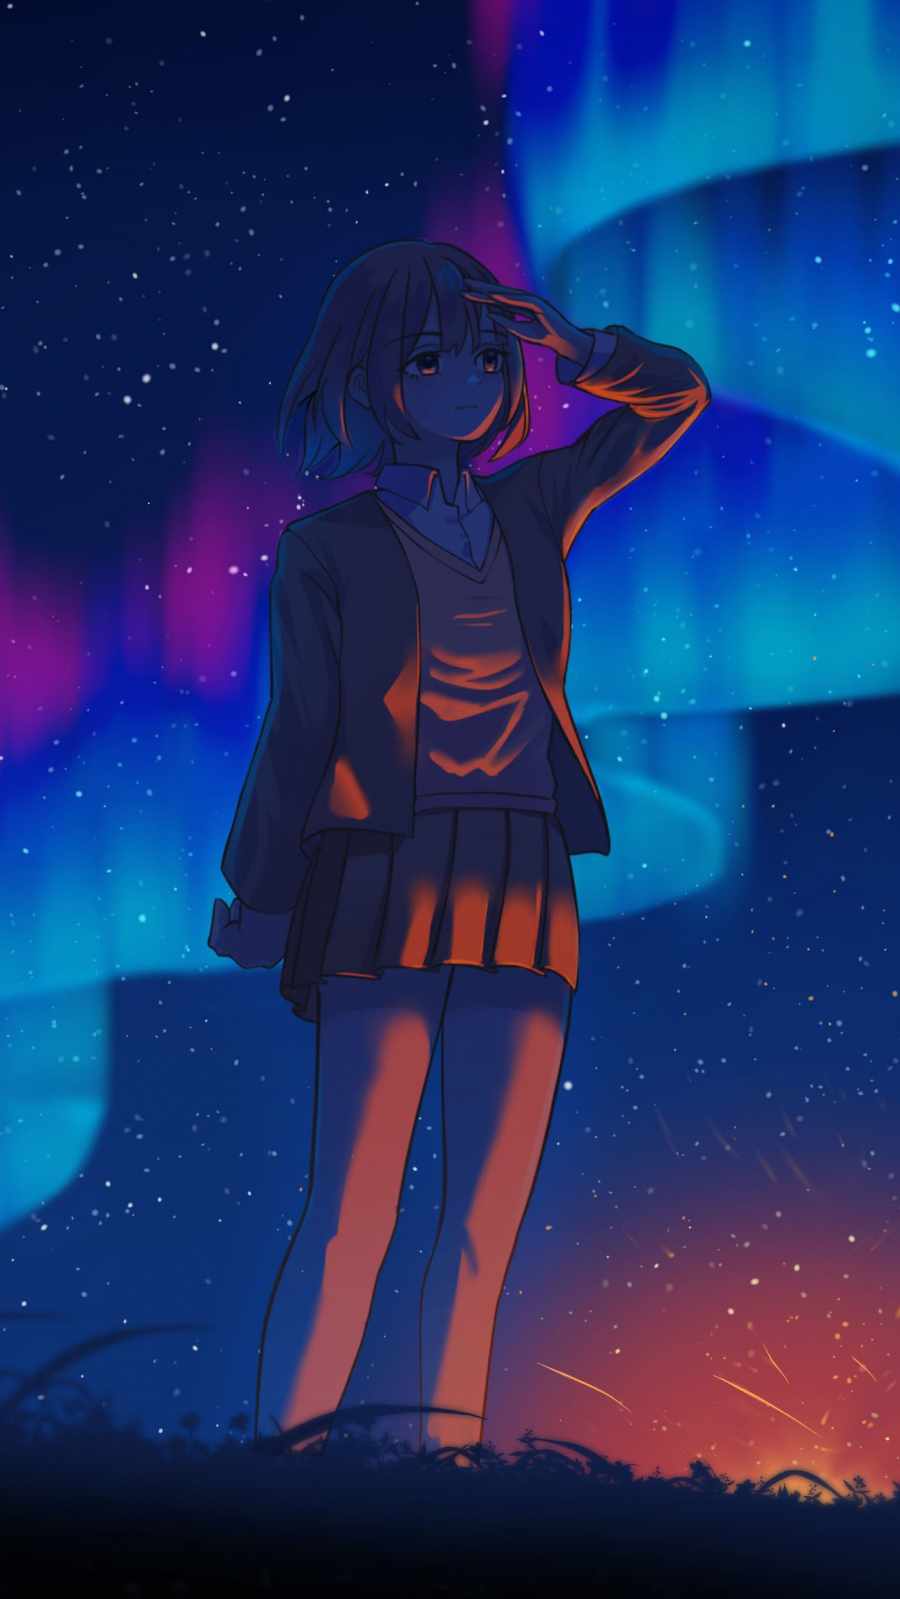 Anime Girl at Northern Lights iPhone Wallpaper